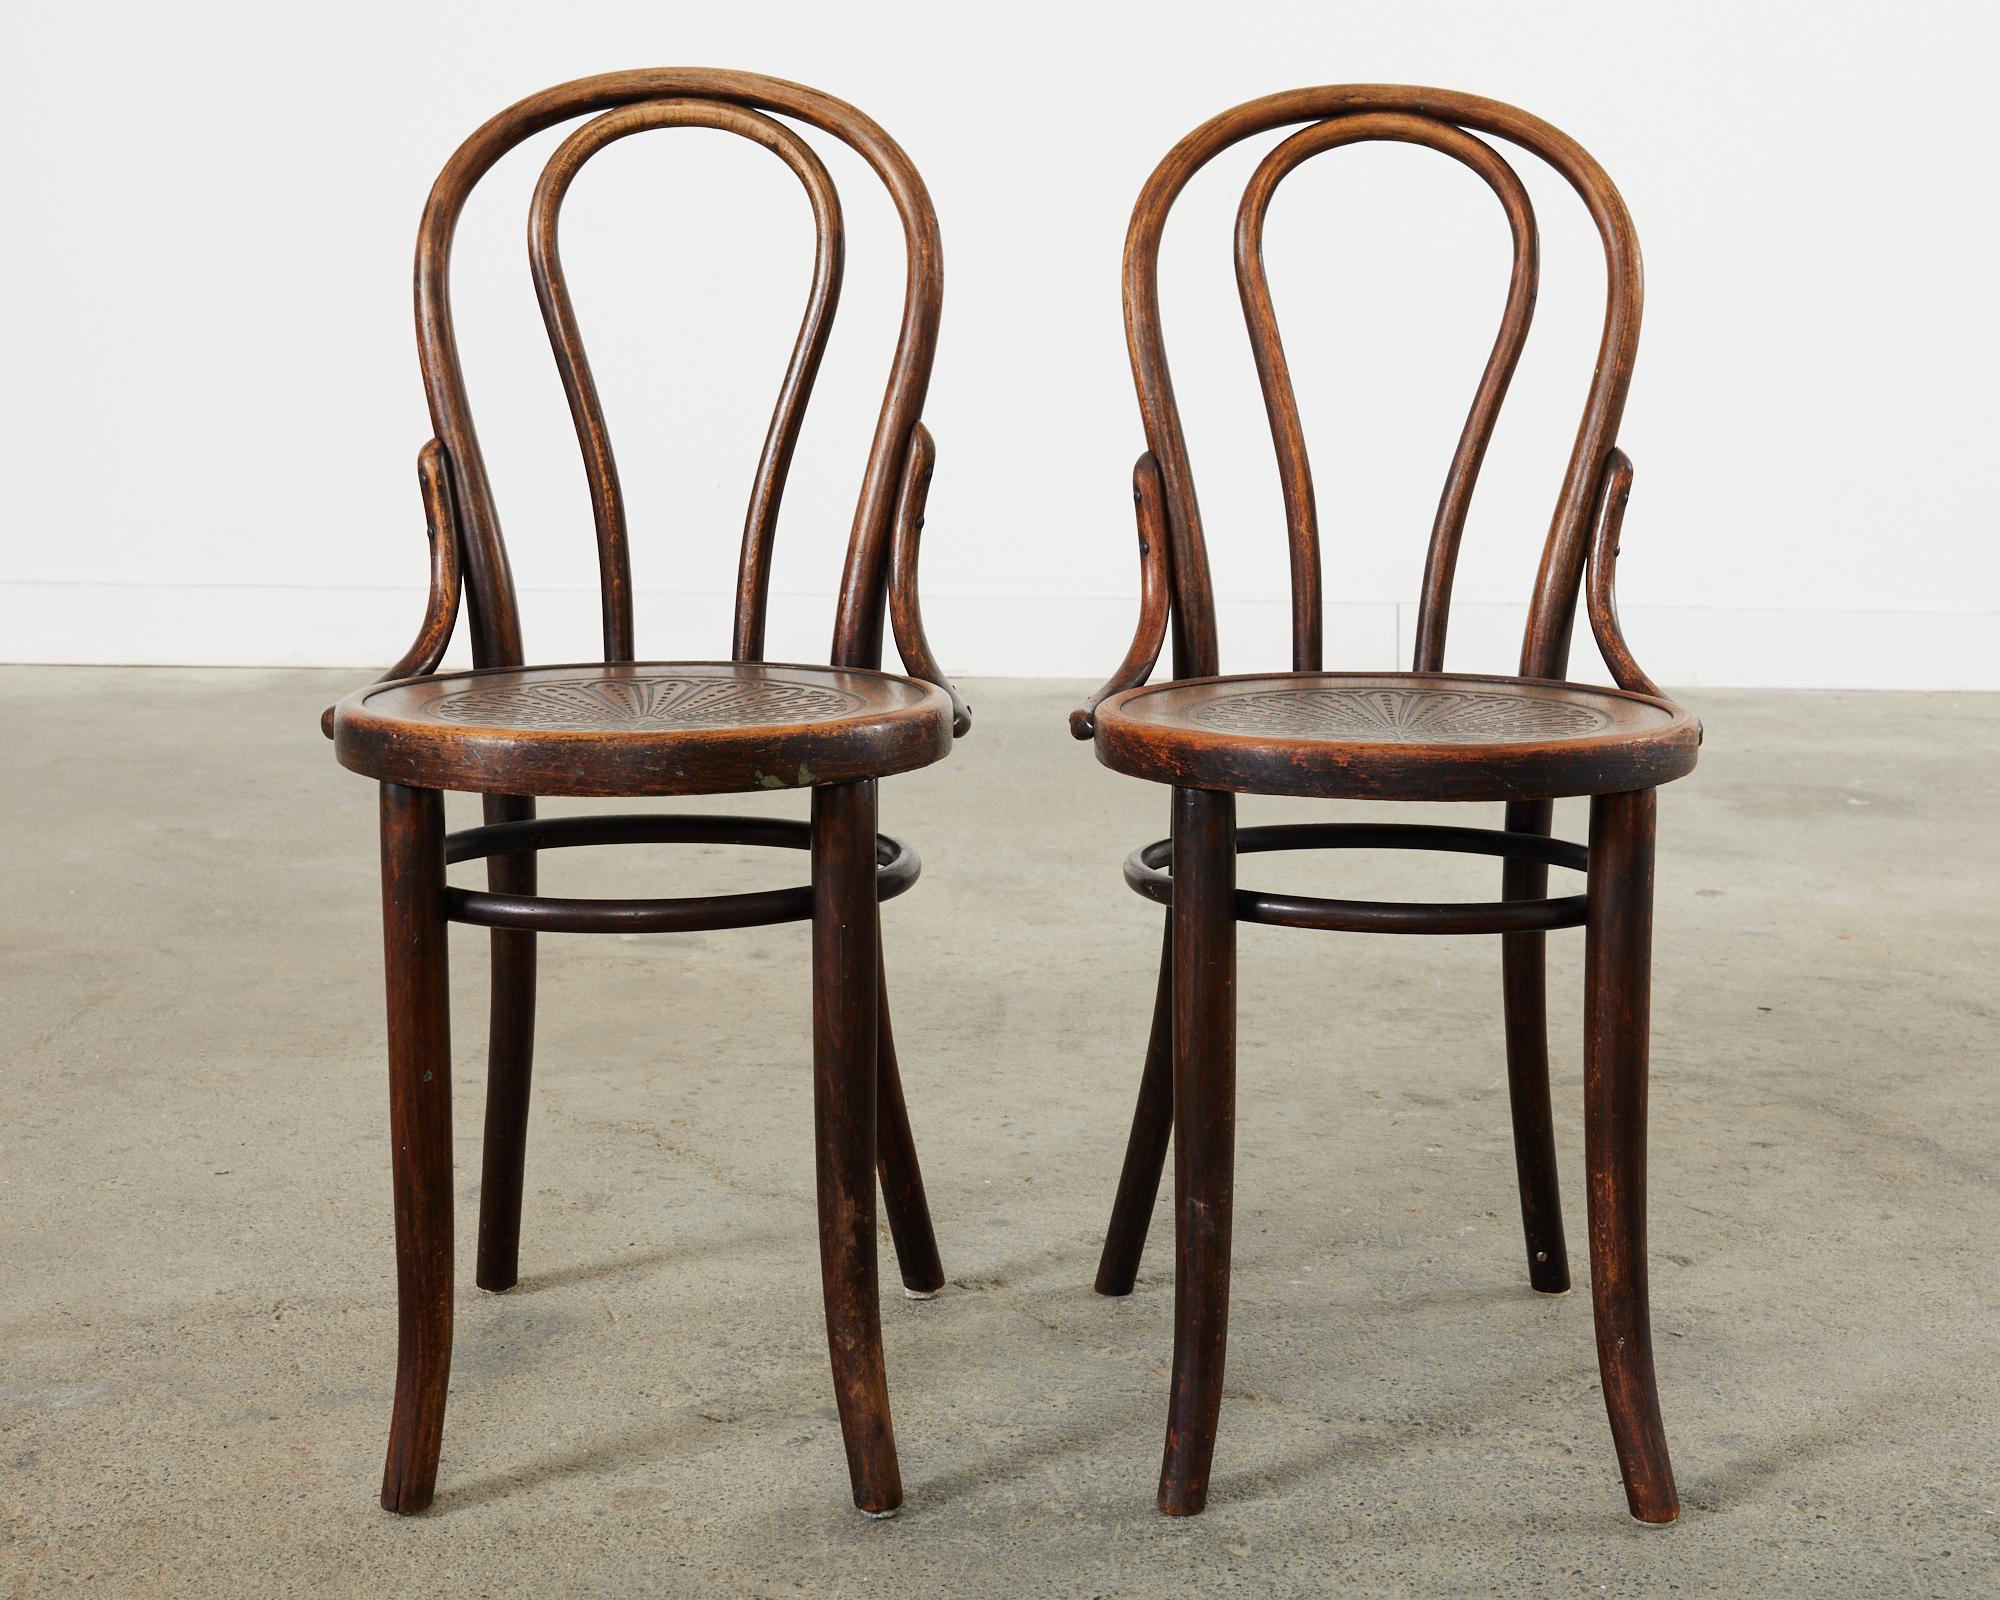 Hand-Crafted Set of Four Thonet Labeled Bentwood Cafe Bistro Chairs